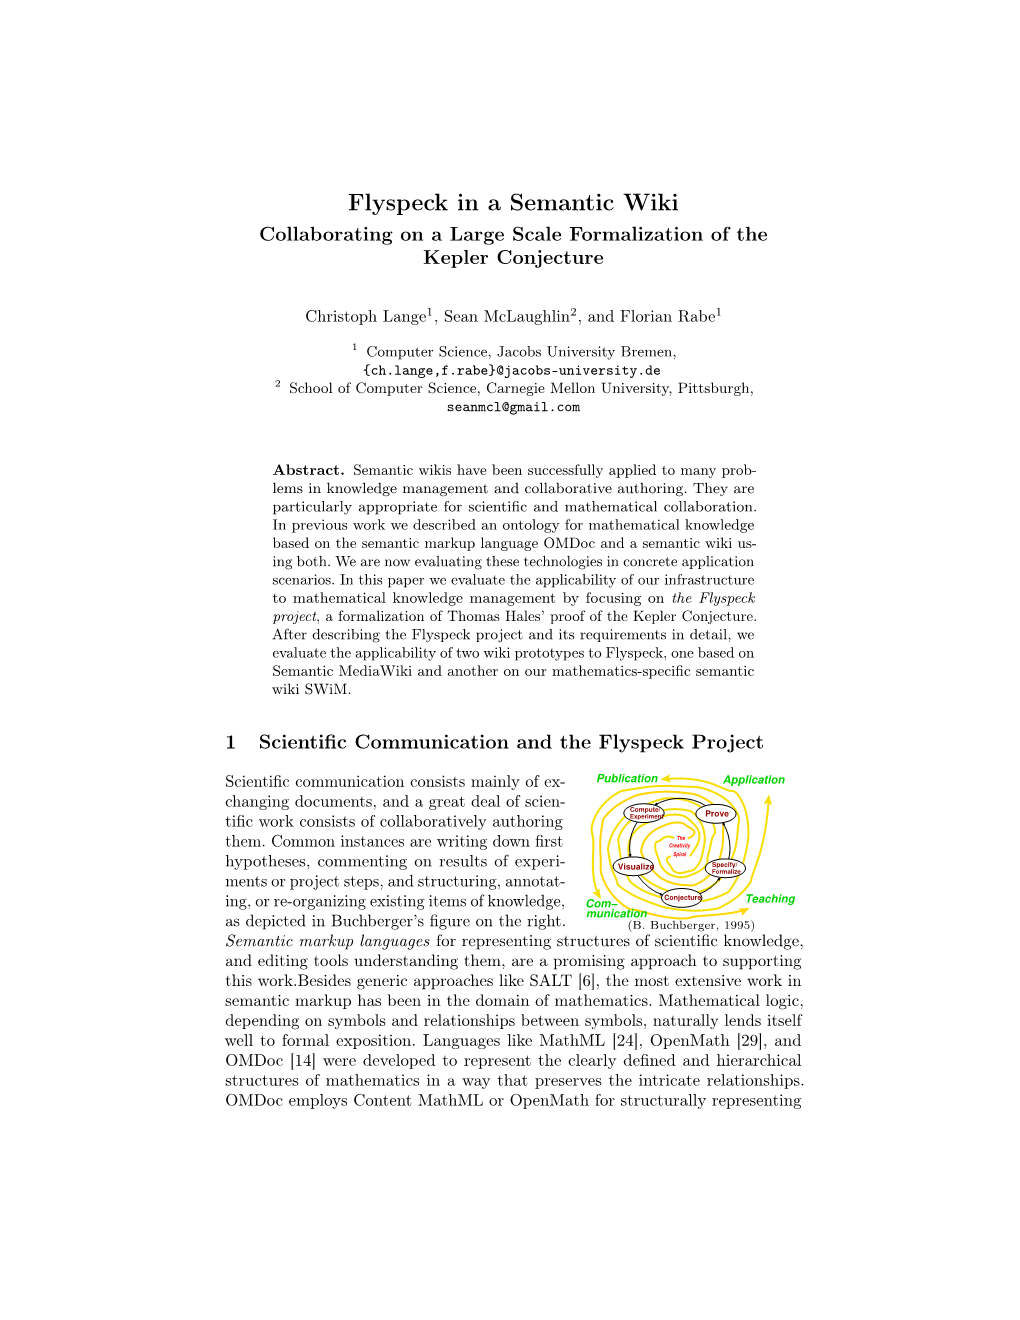 Flyspeck in a Semantic Wiki Collaborating on a Large Scale Formalization of the Kepler Conjecture